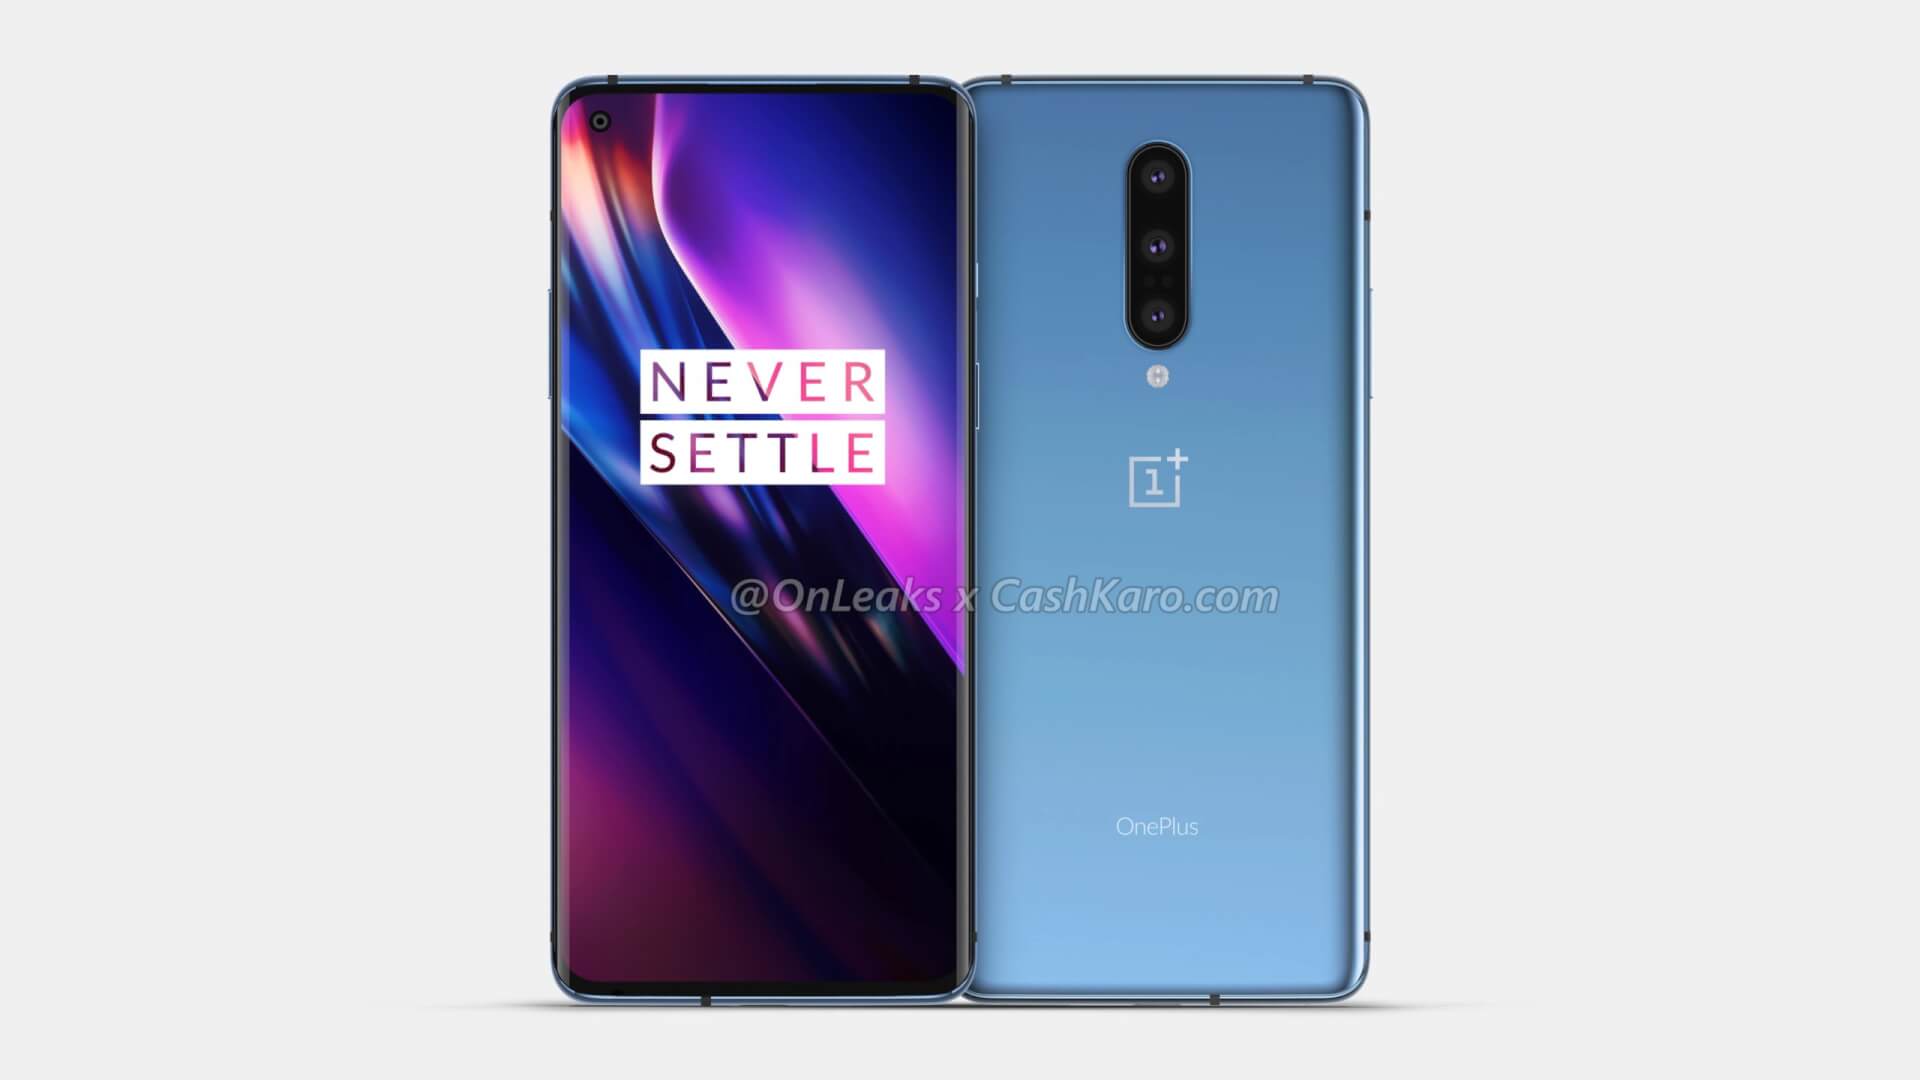 ONEPLUS-8-front-and-back renders